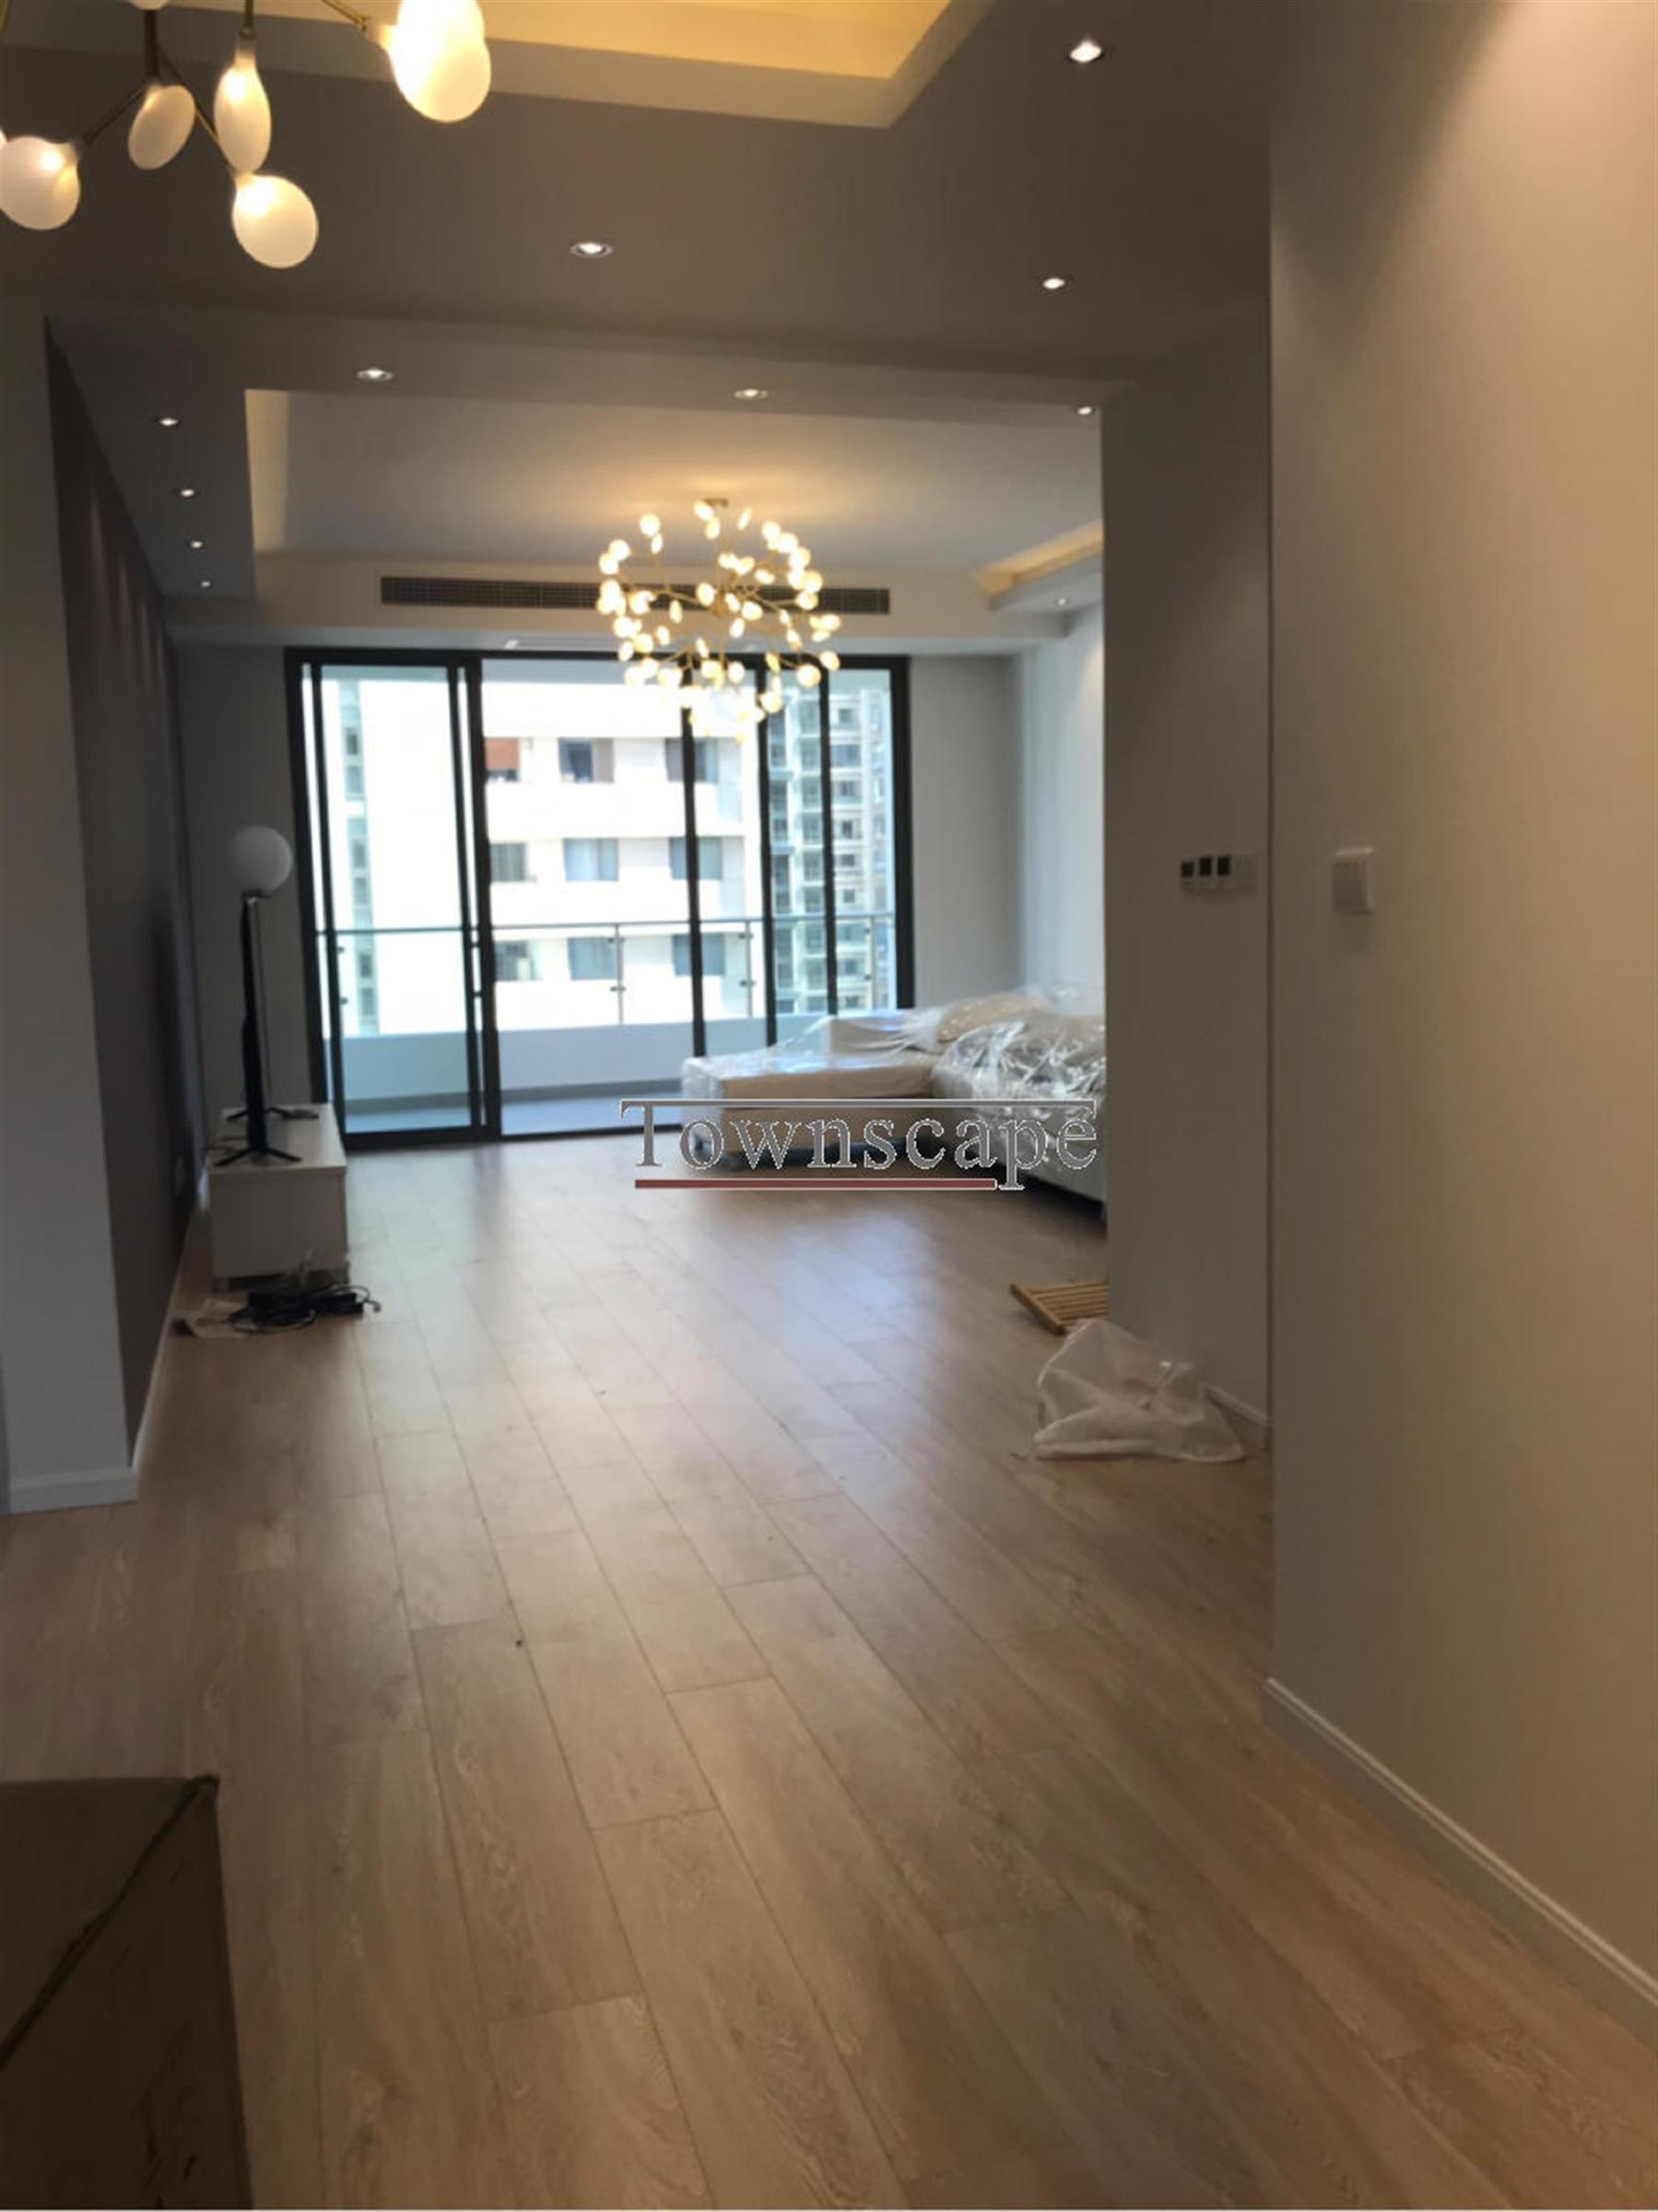 Open area New Bright Spacious Apartment in High-End Top-of-City in Jing